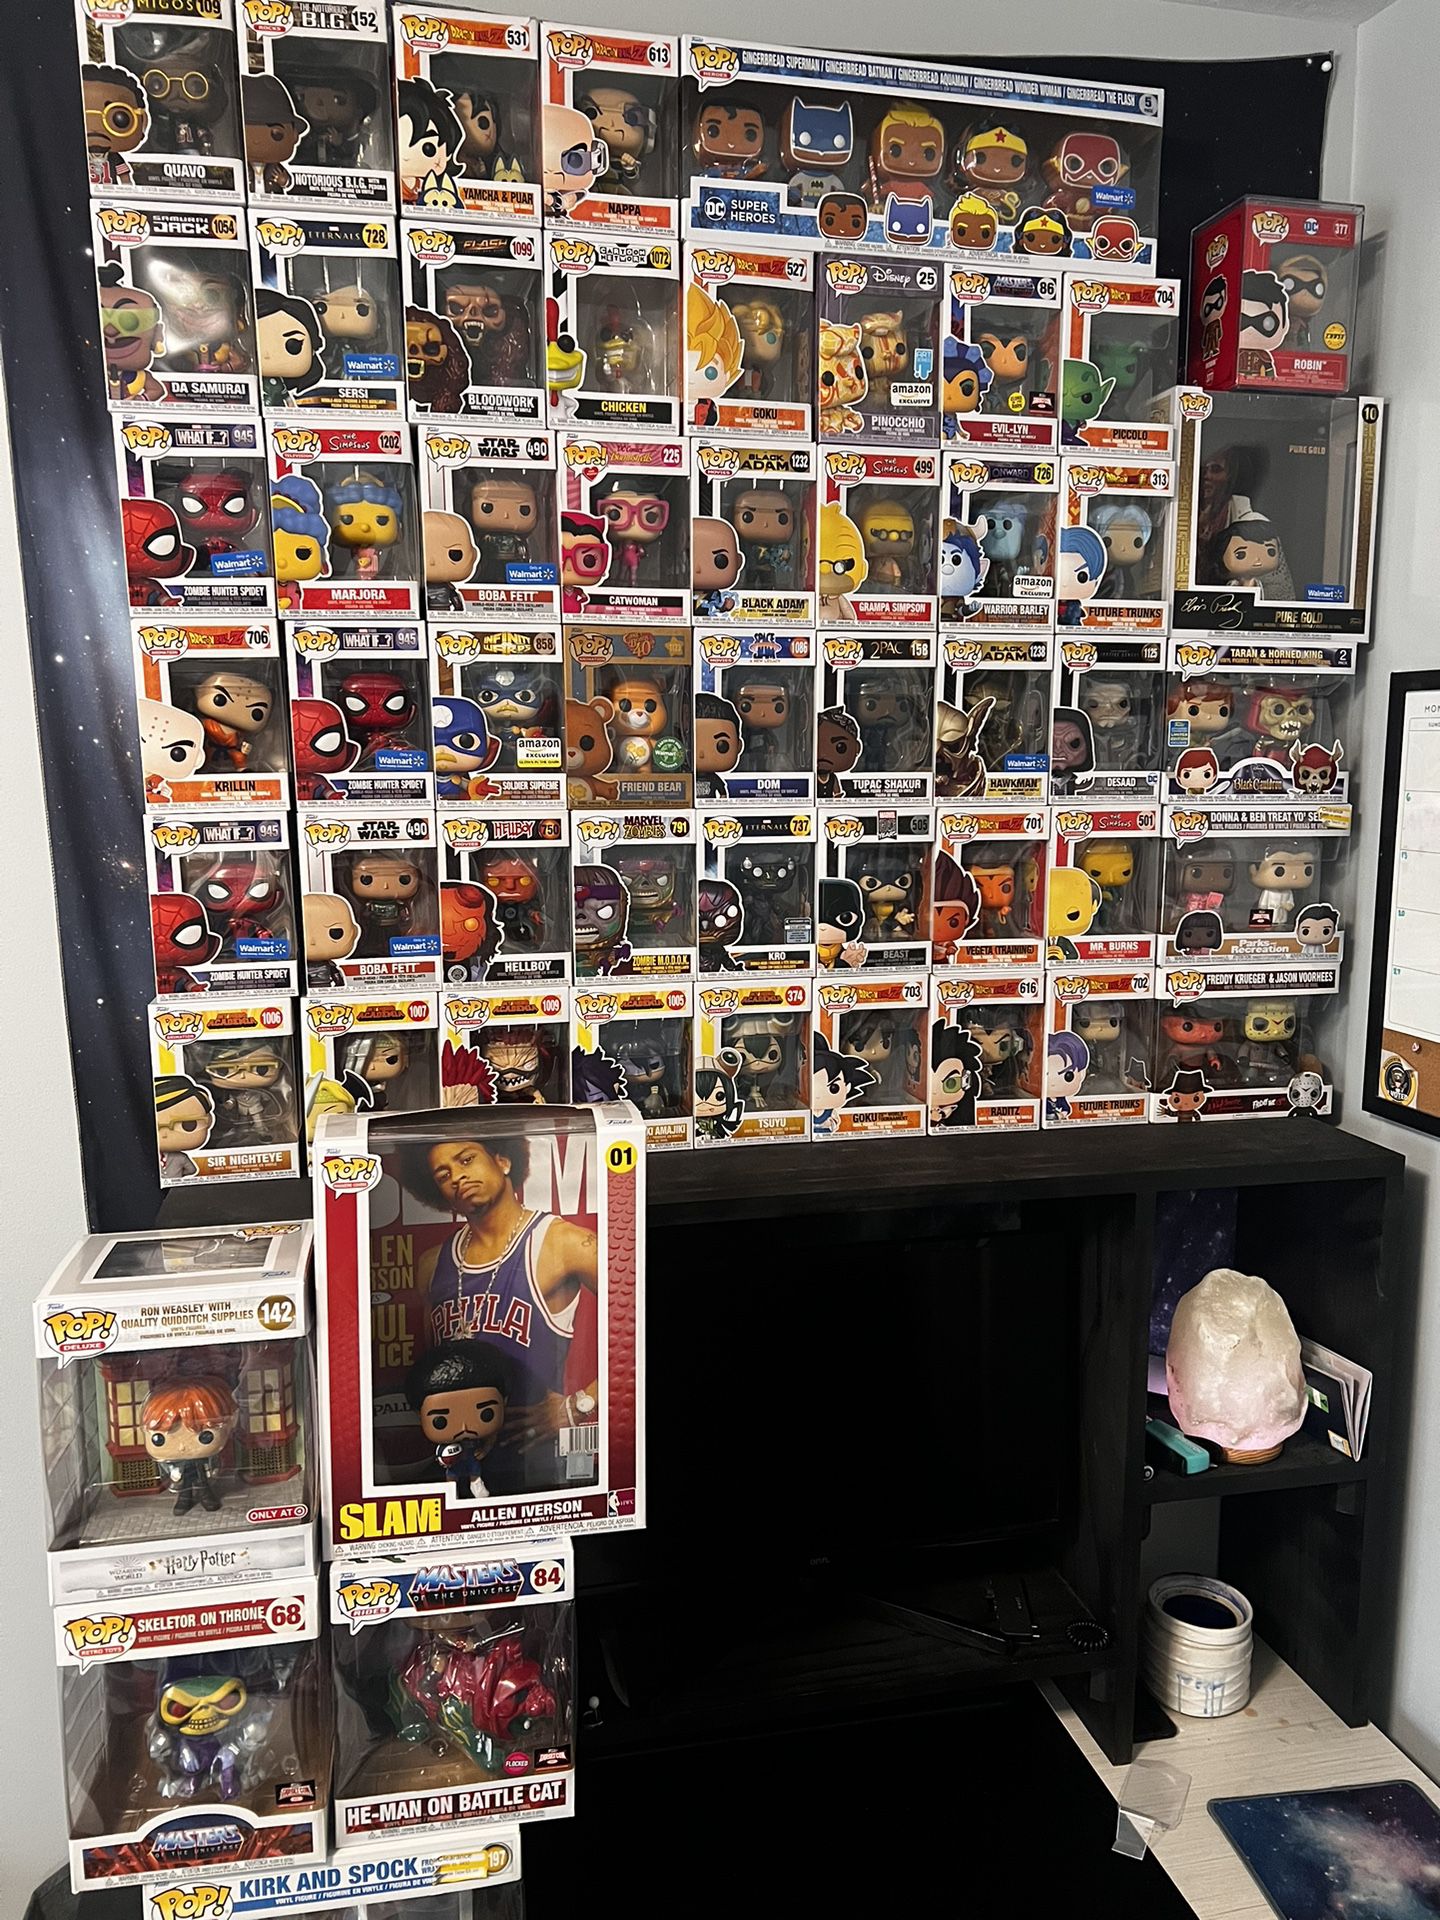 WHOLE BUNCH OF FUNKO POPS